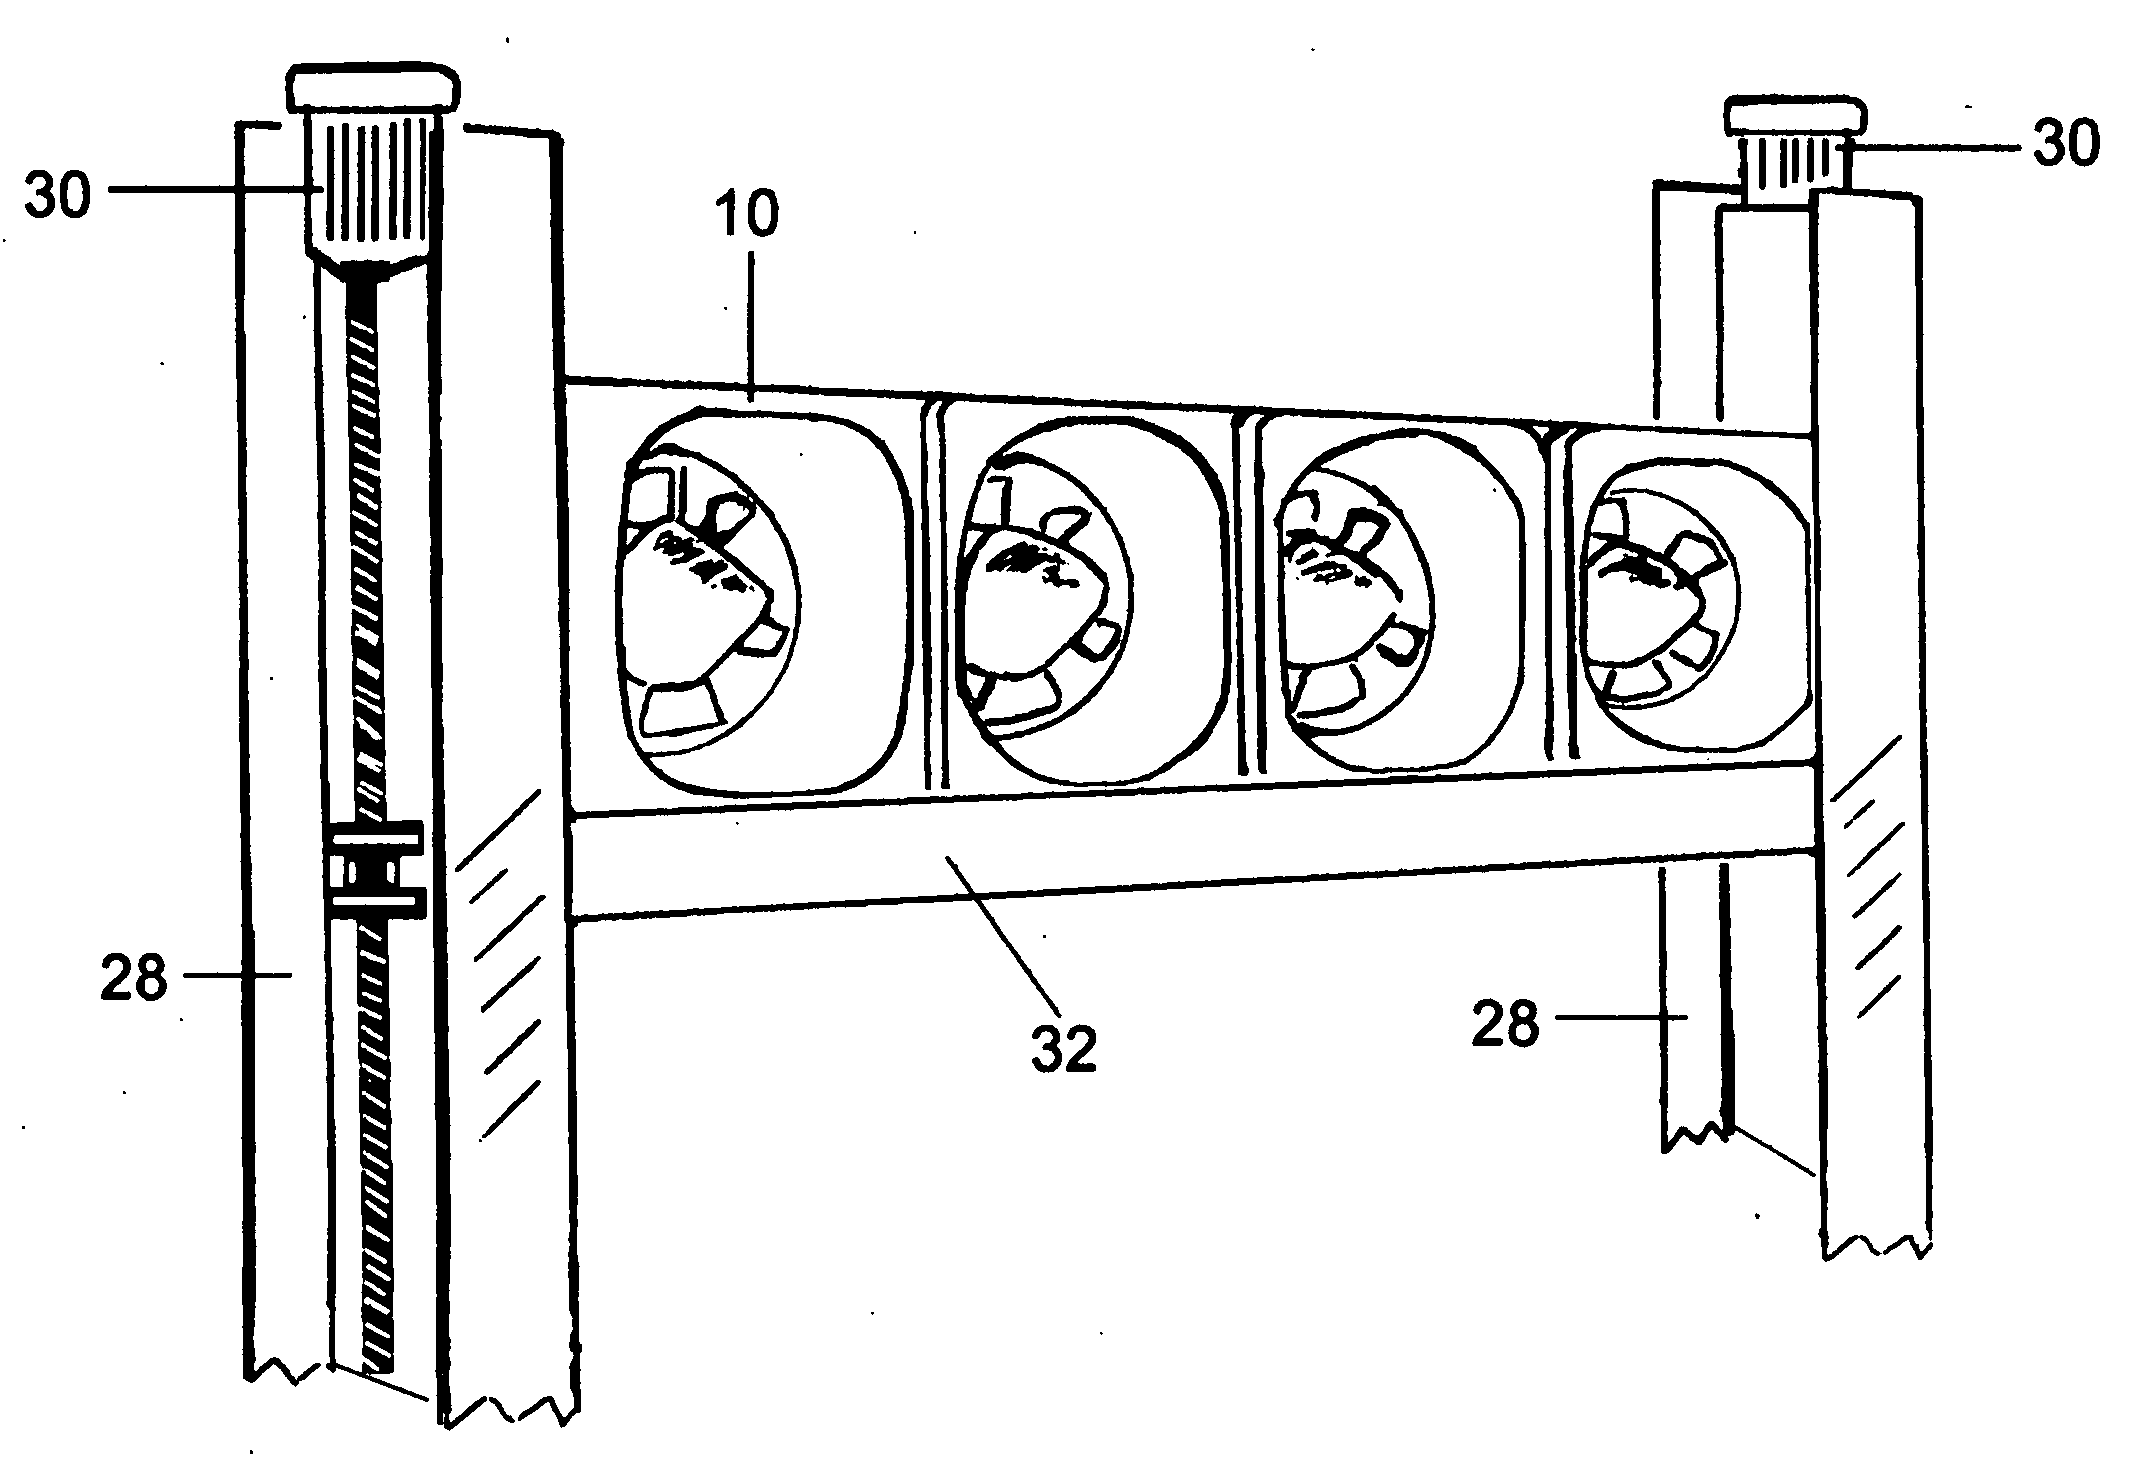 Water turbine for generating electricity